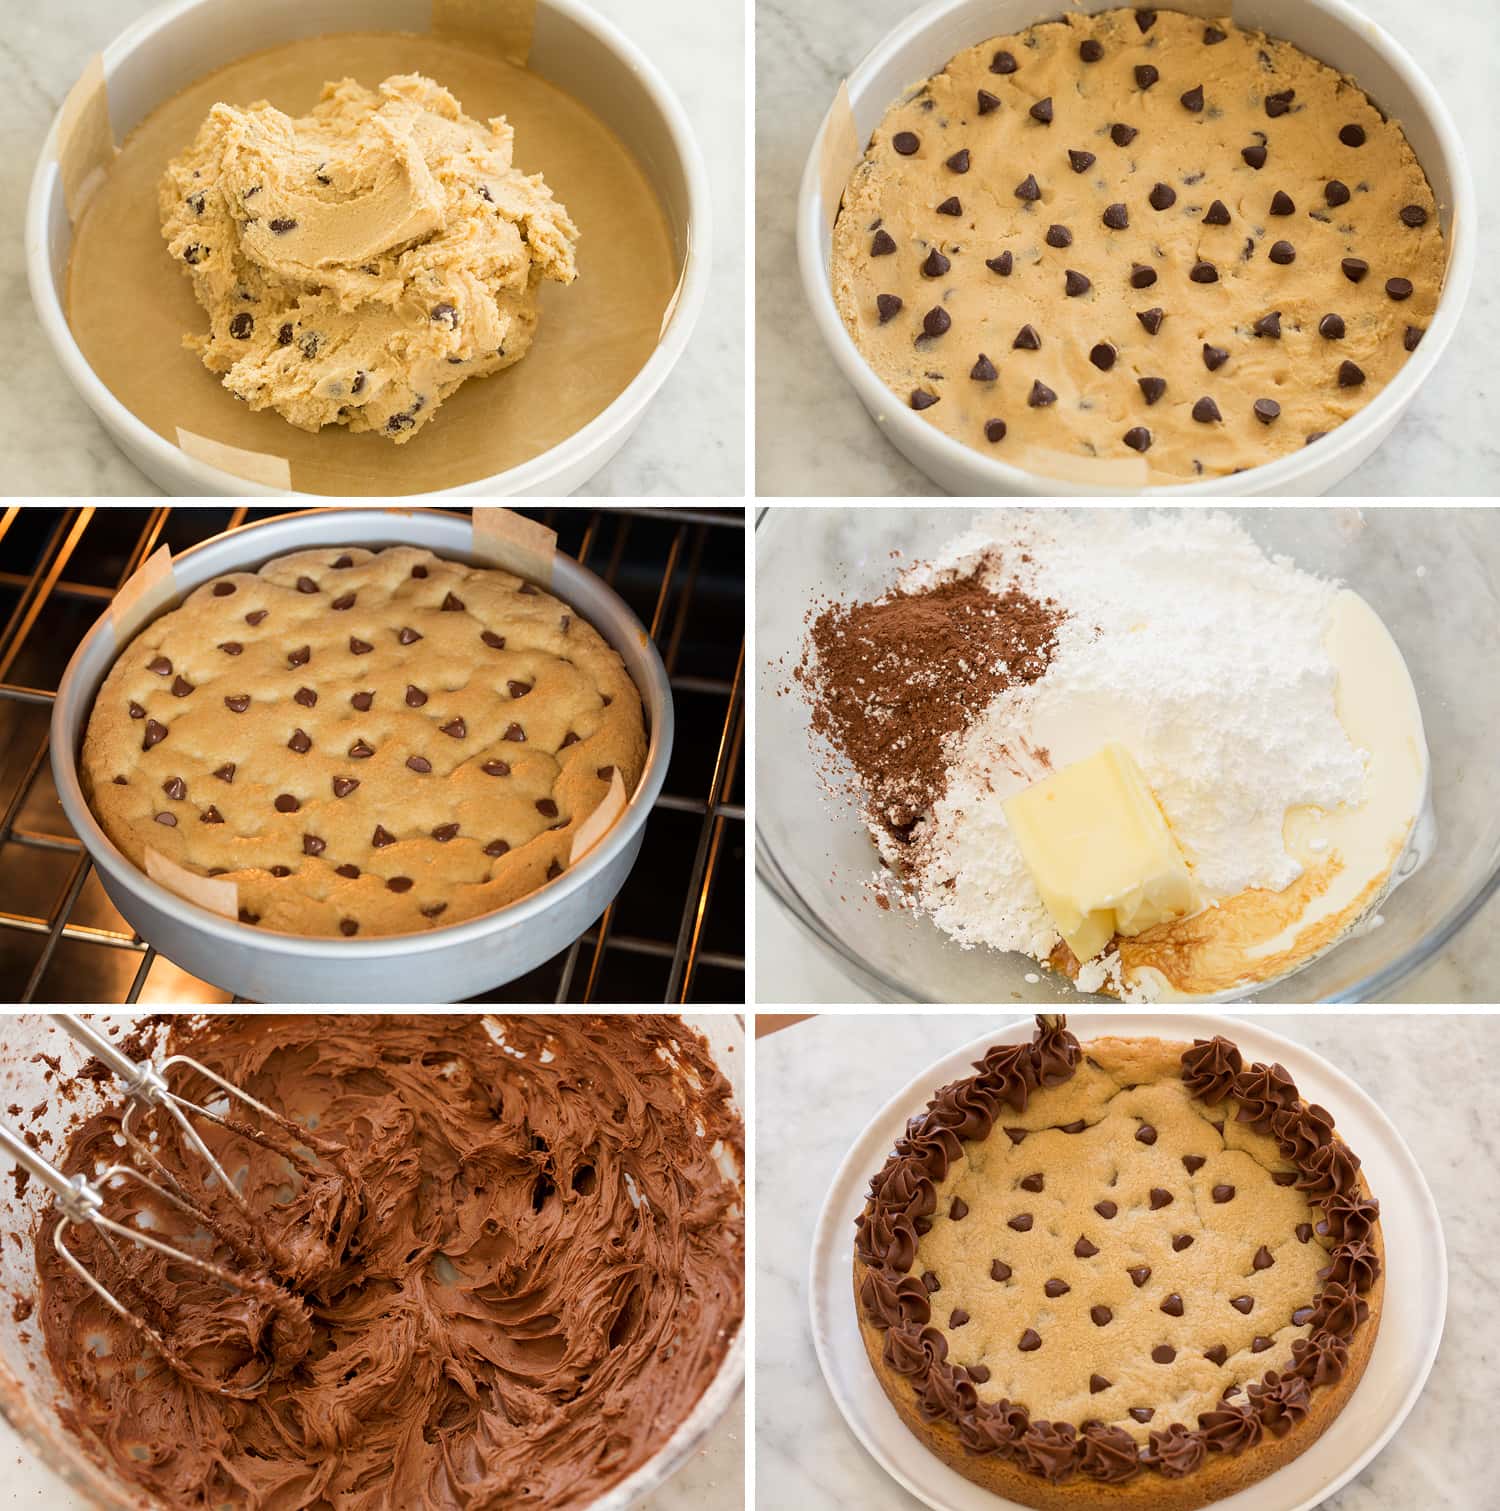 Continued six steps to make cookie cake and frosting.